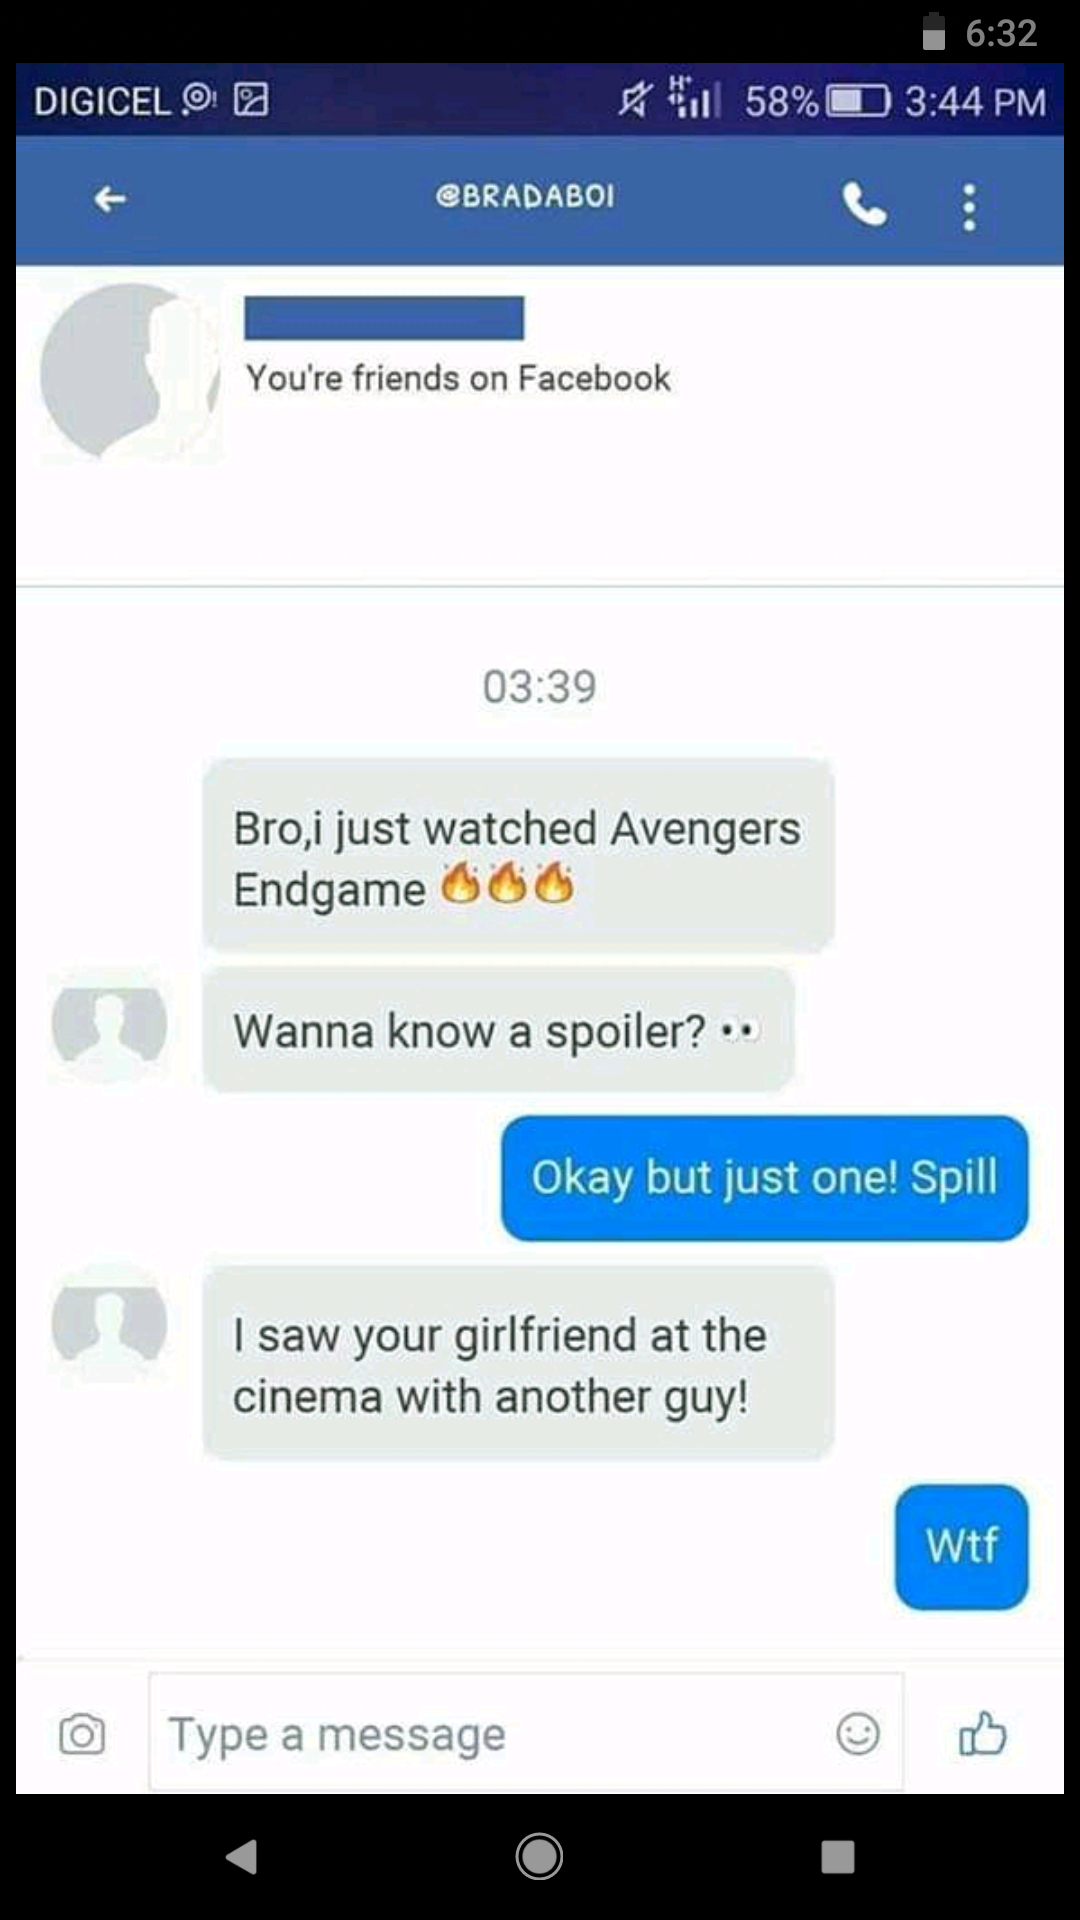 funny pics and memes - web page - D Digicel 2 58% Sbradaboi You're friends on Facebook Bro,i just watched Avengers Endgame 06 Wanna know a spoiler?.. Okay but just one! Spill I saw your girlfriend at the cinema with another guy! Wtf Type a message